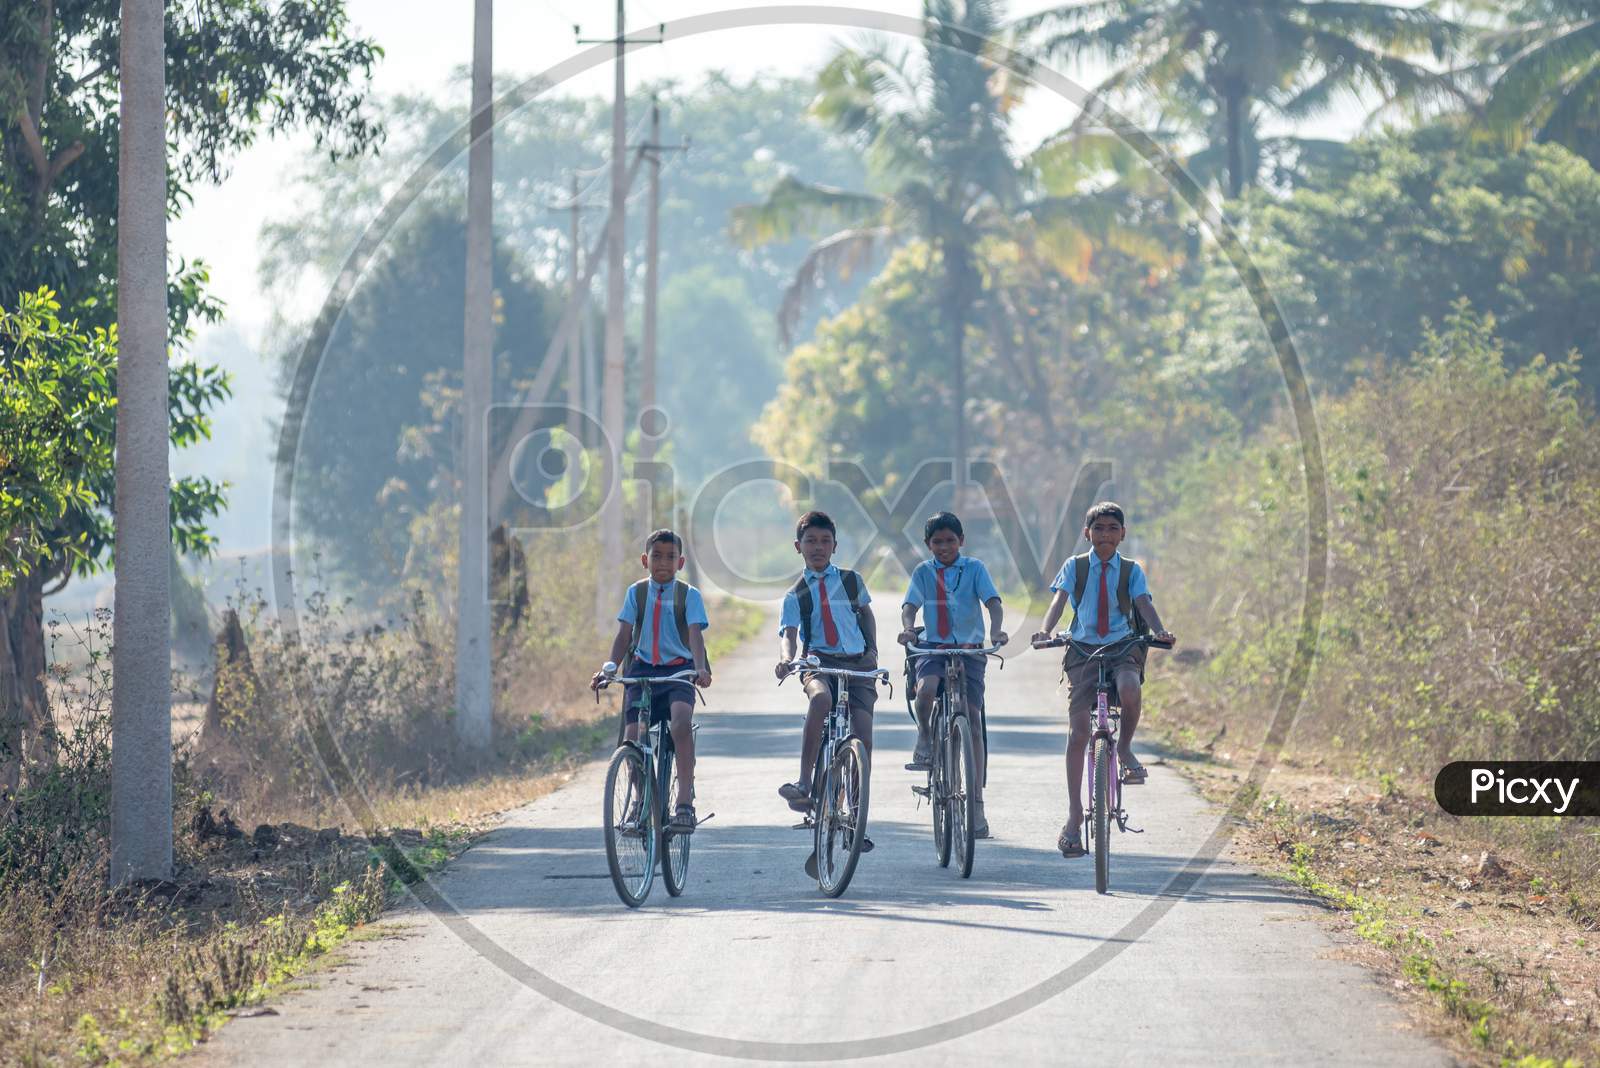 School Students Riding Cycles on Rural Village Roads